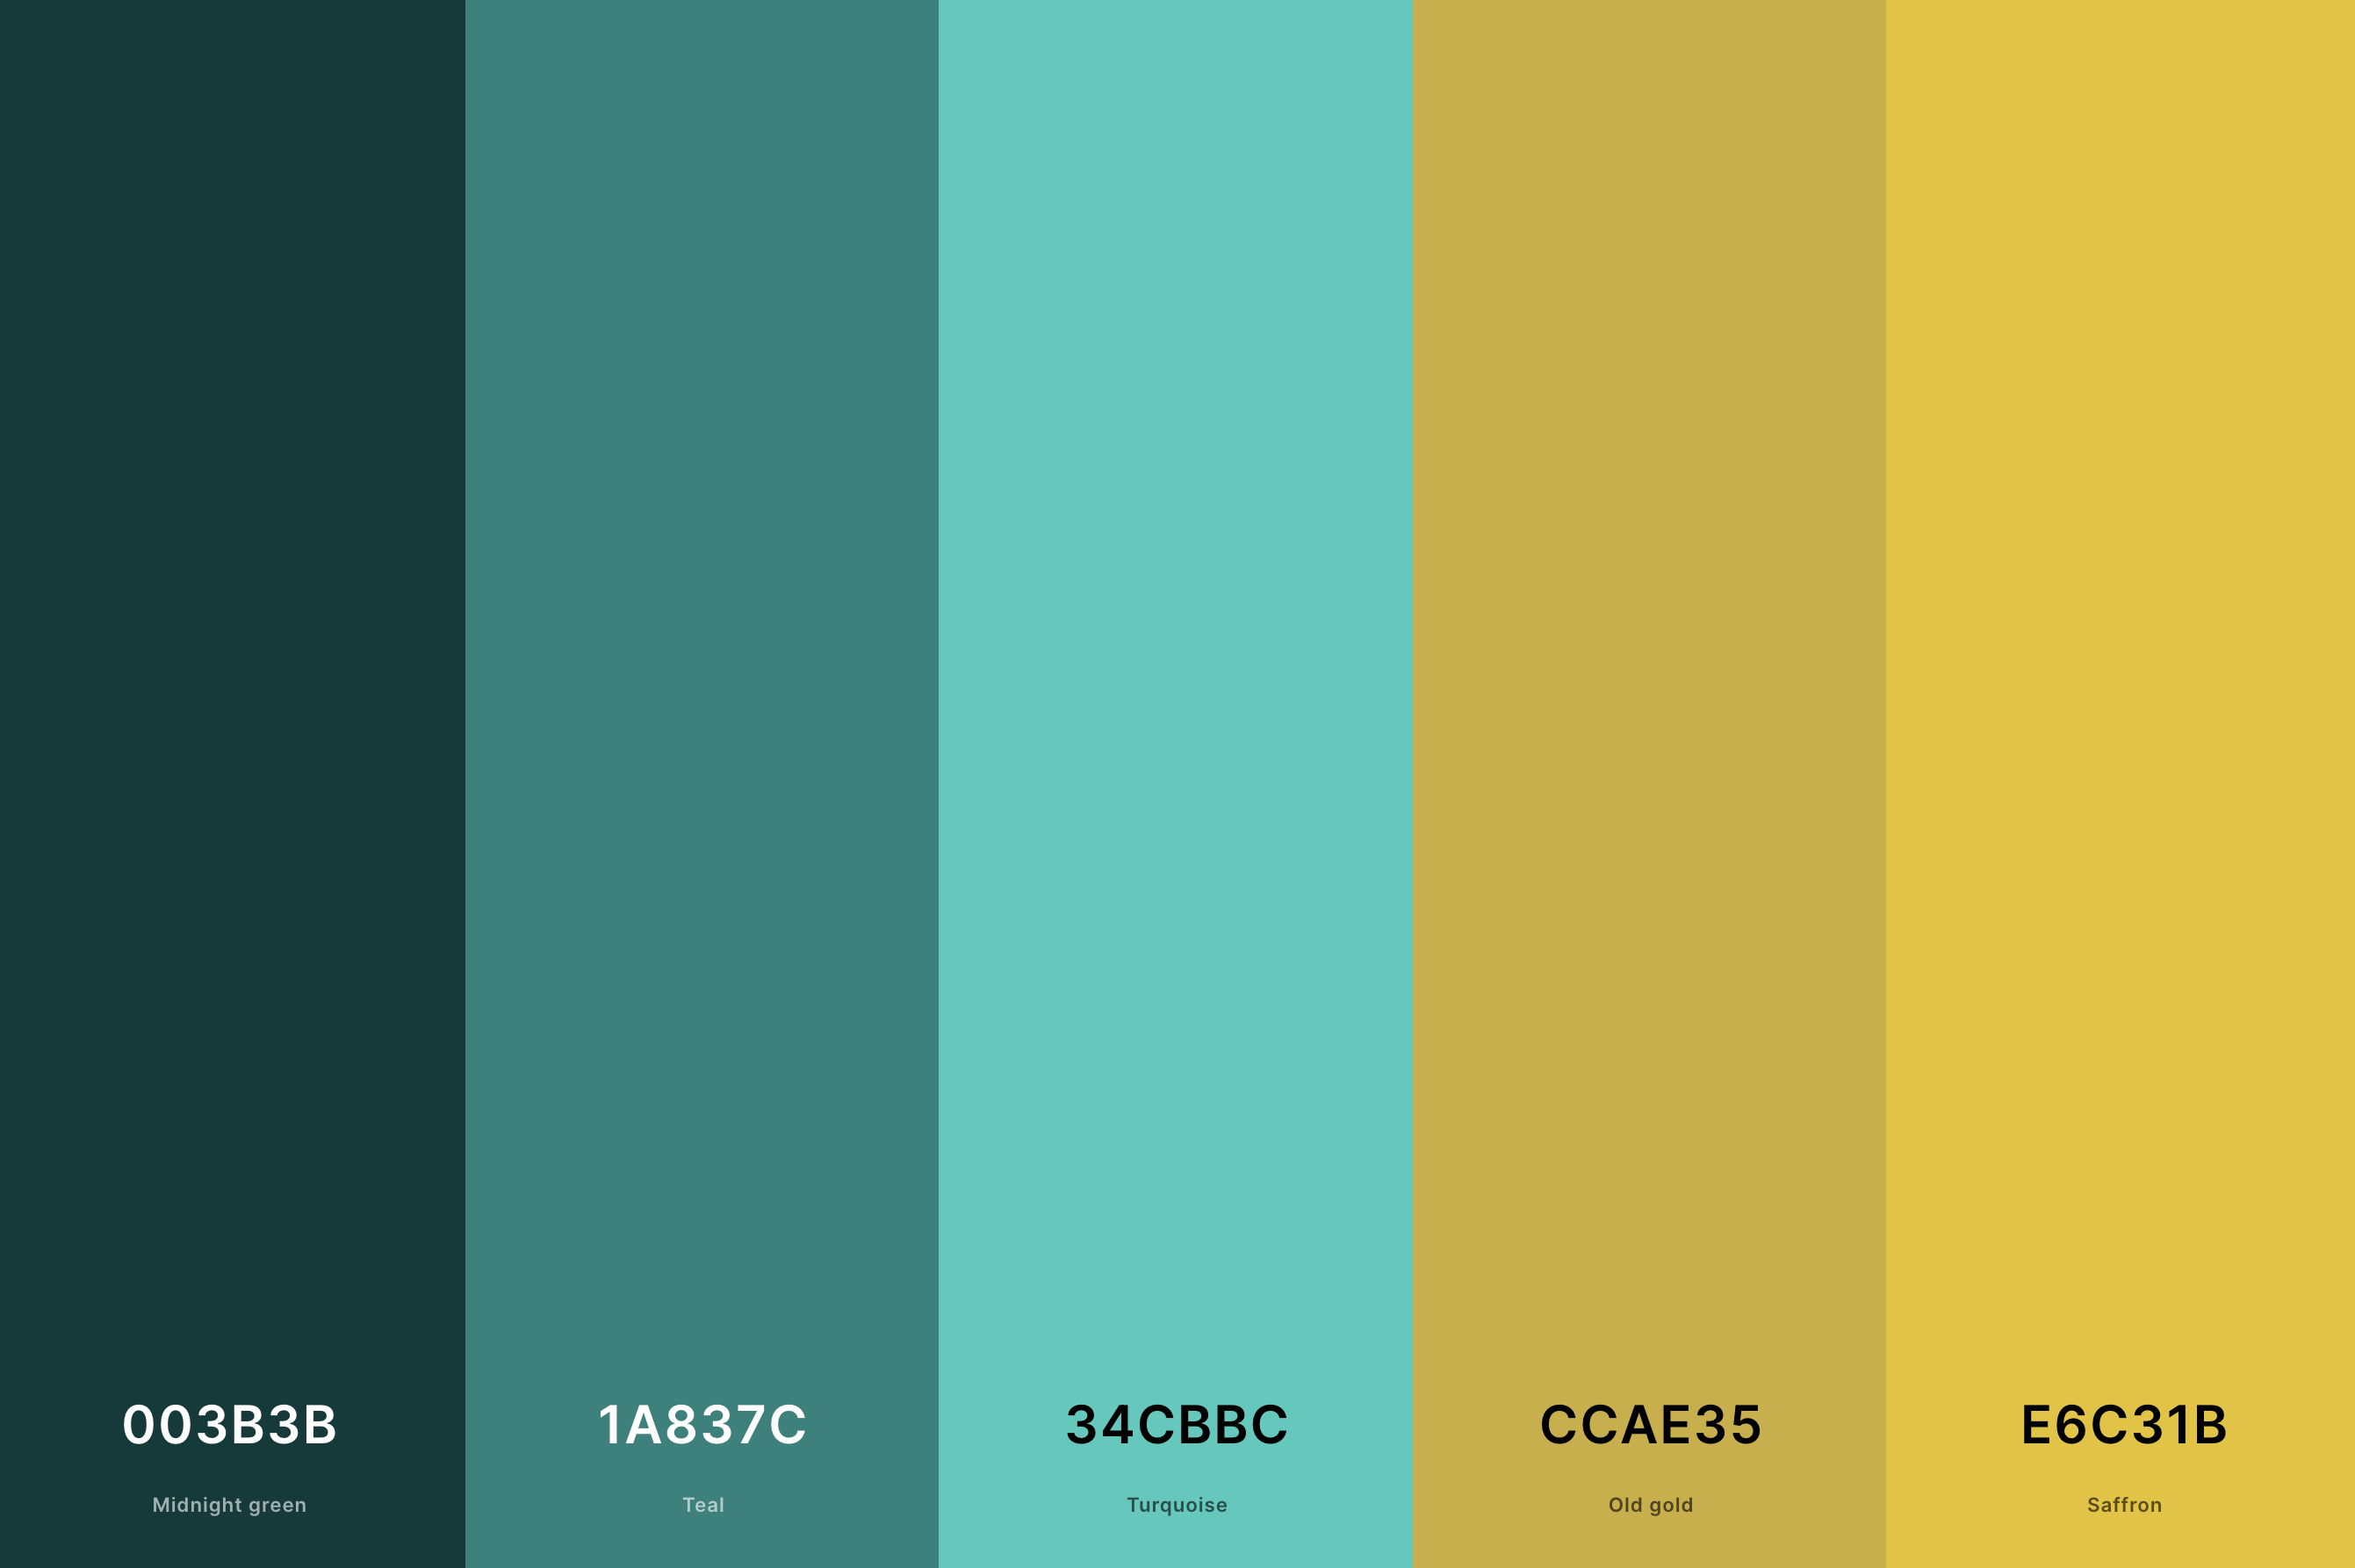 3. Turquoise And Gold Color Palette Color Palette with Midnight Green (Hex #003B3B) + Teal (Hex #1A837C) + Turquoise (Hex #34CBBC) + Old Gold (Hex #CCAE35) + Saffron (Hex #E6C31B) Color Palette with Hex Codes